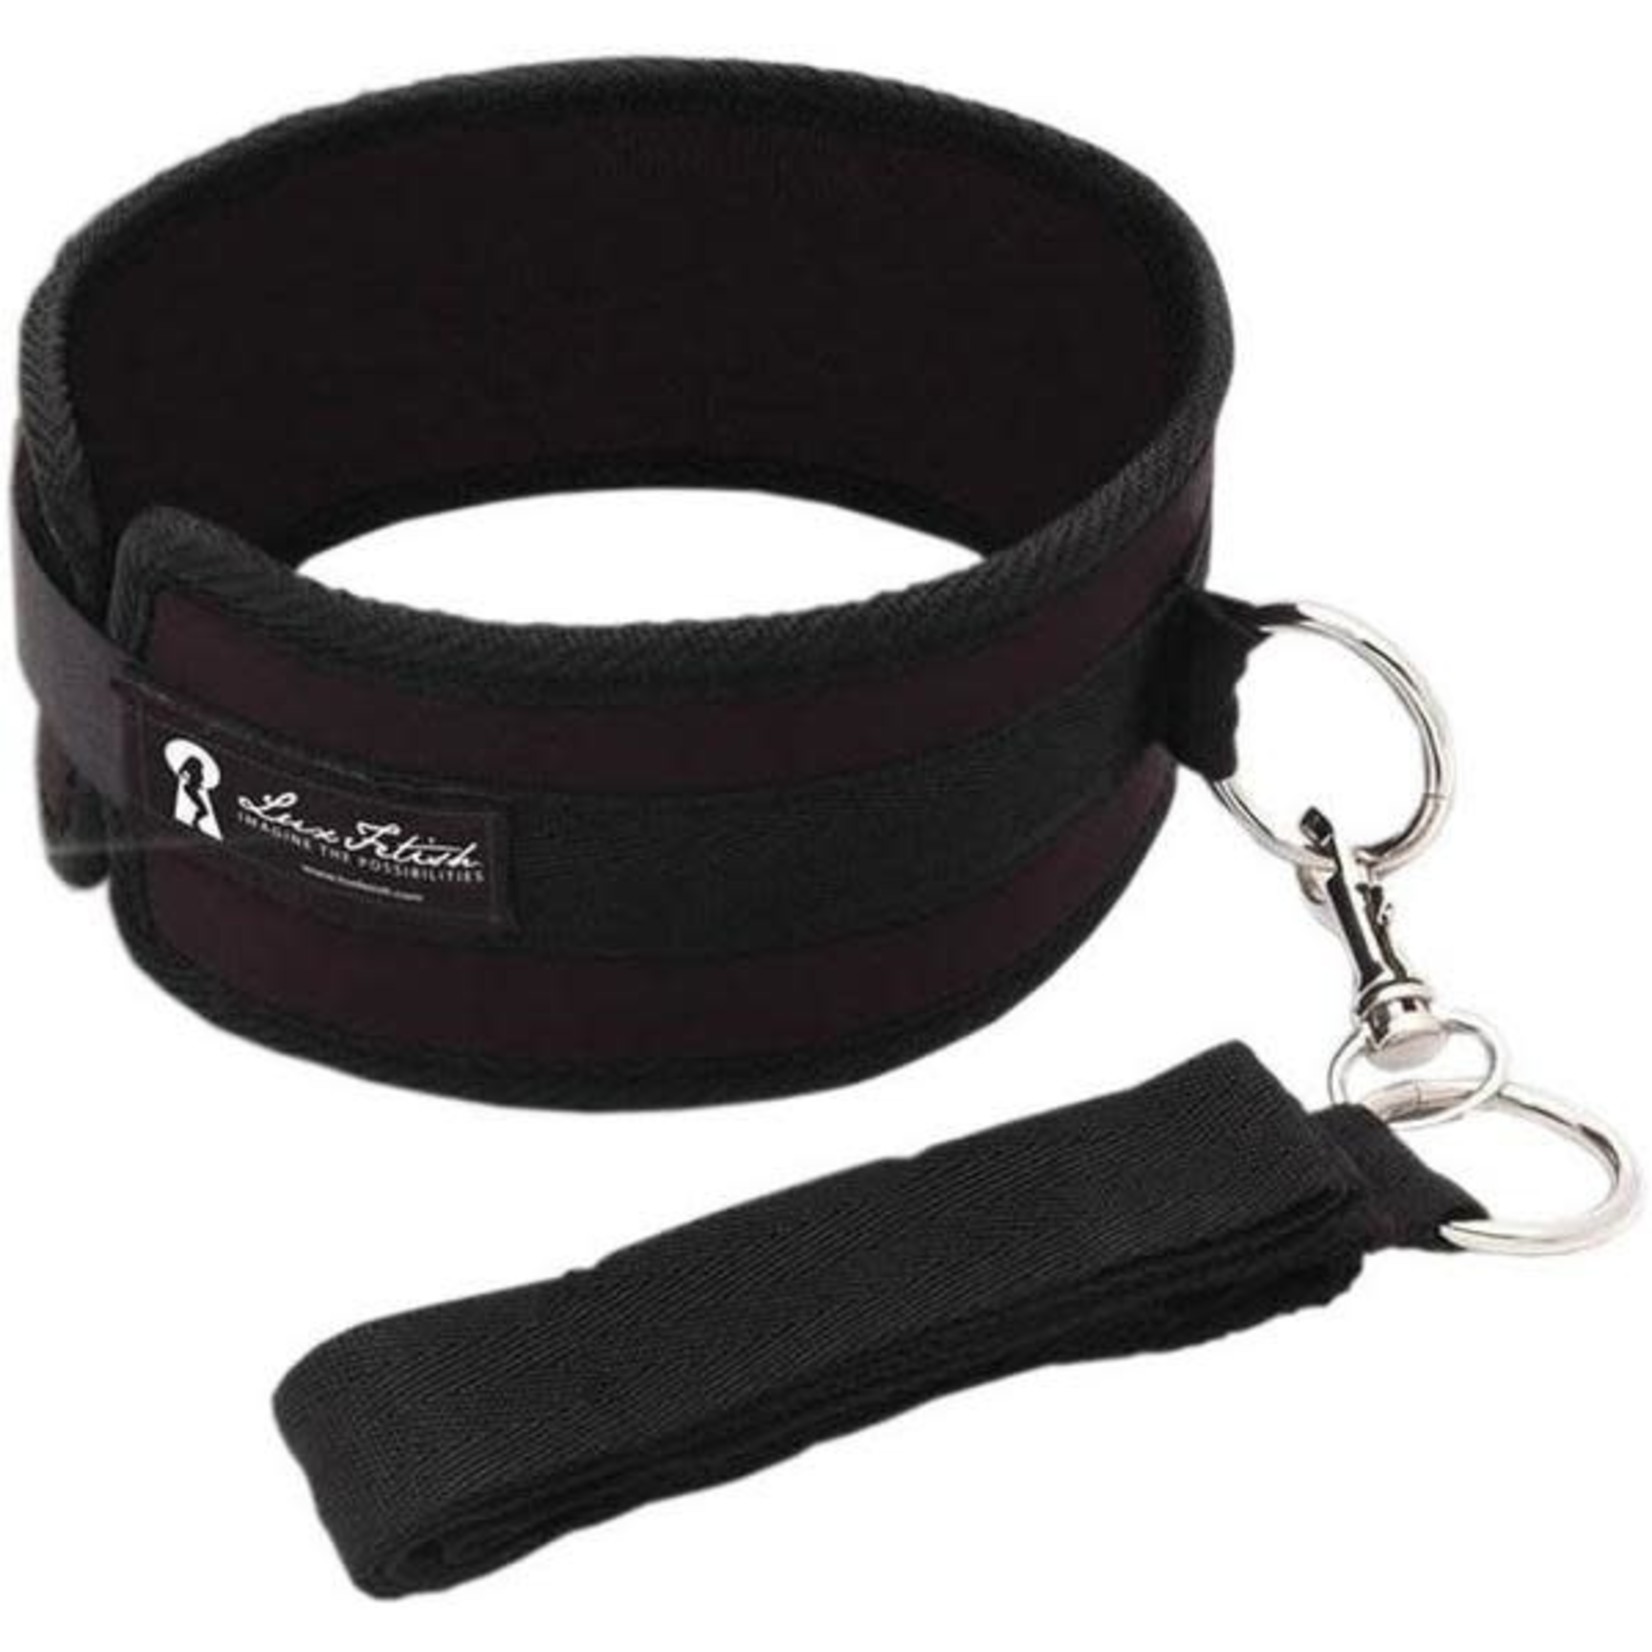 LUXFETISH - COLLAR AND LEASH SET - BLACK